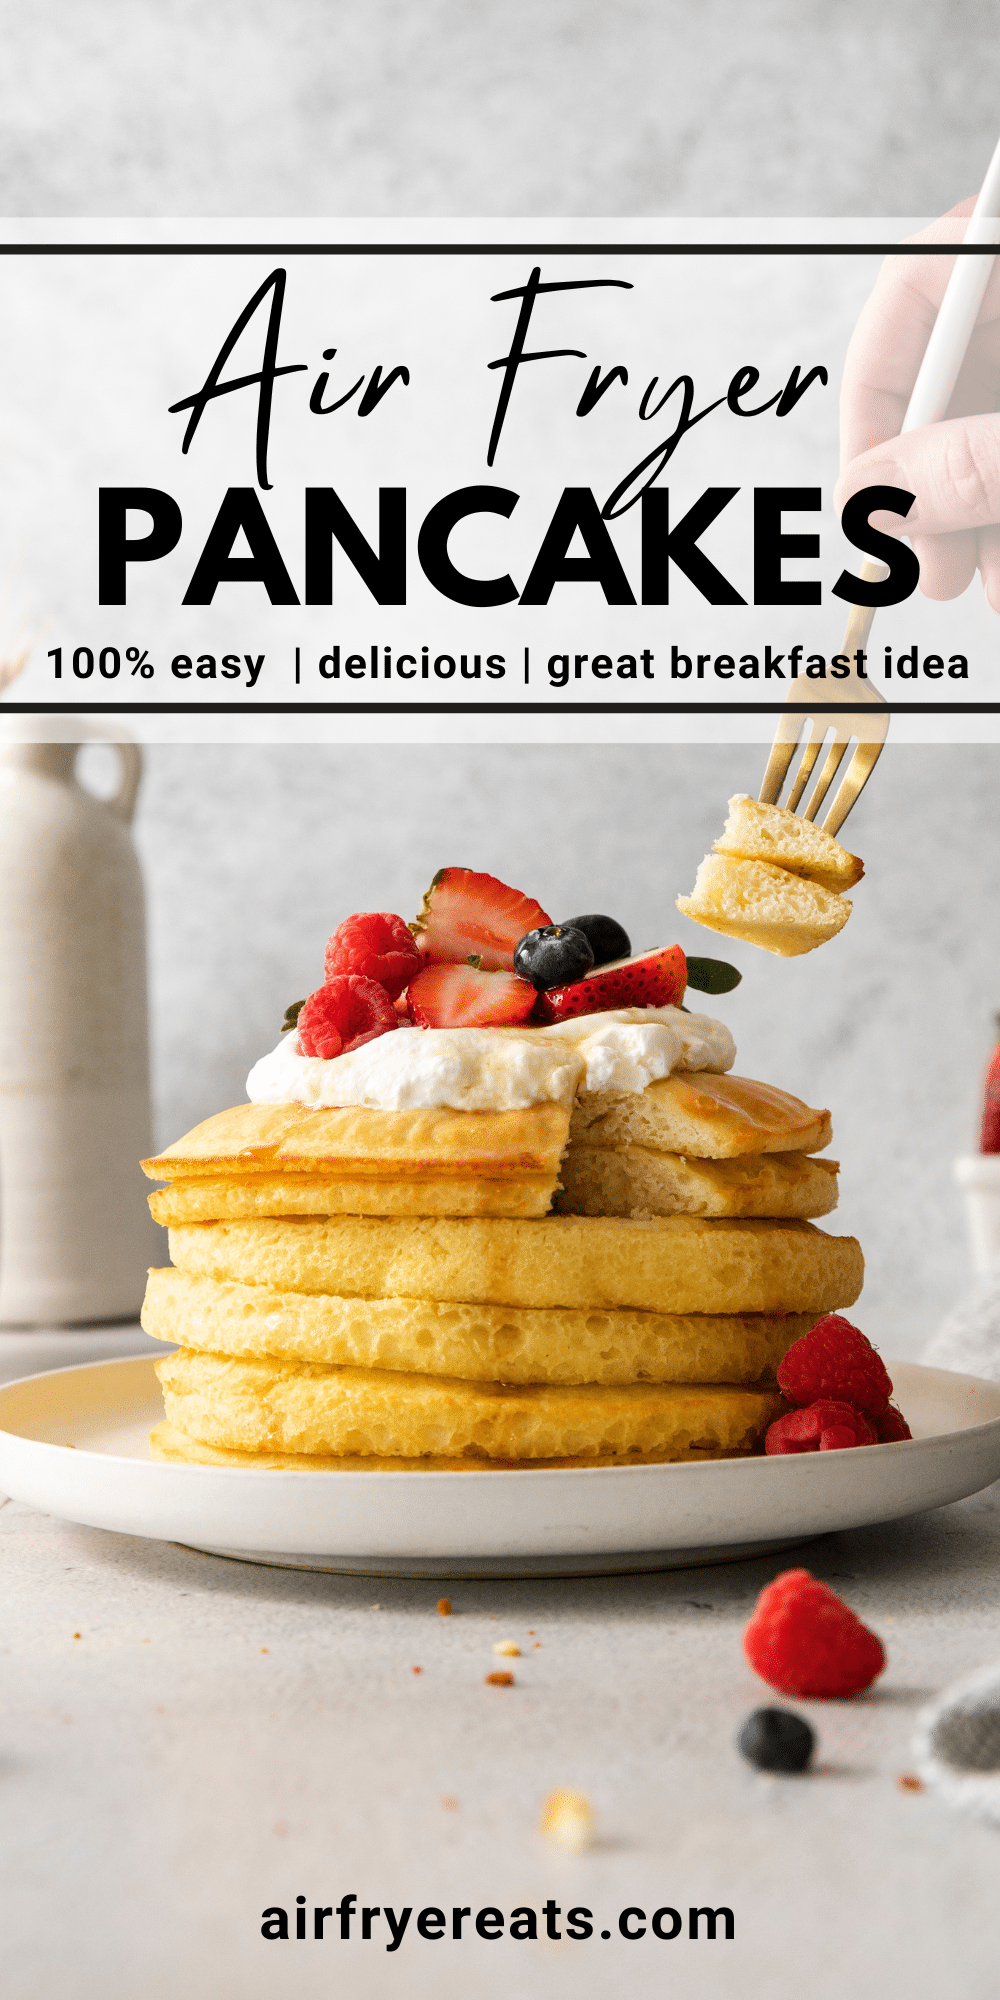 Incredibly tender, fluffy pancakes are so simple to make in the air fryer! These Air Fryer Pancakes can be made with any pancake mix or recipe, and they are a family favorite in the morning. via @vegetarianmamma